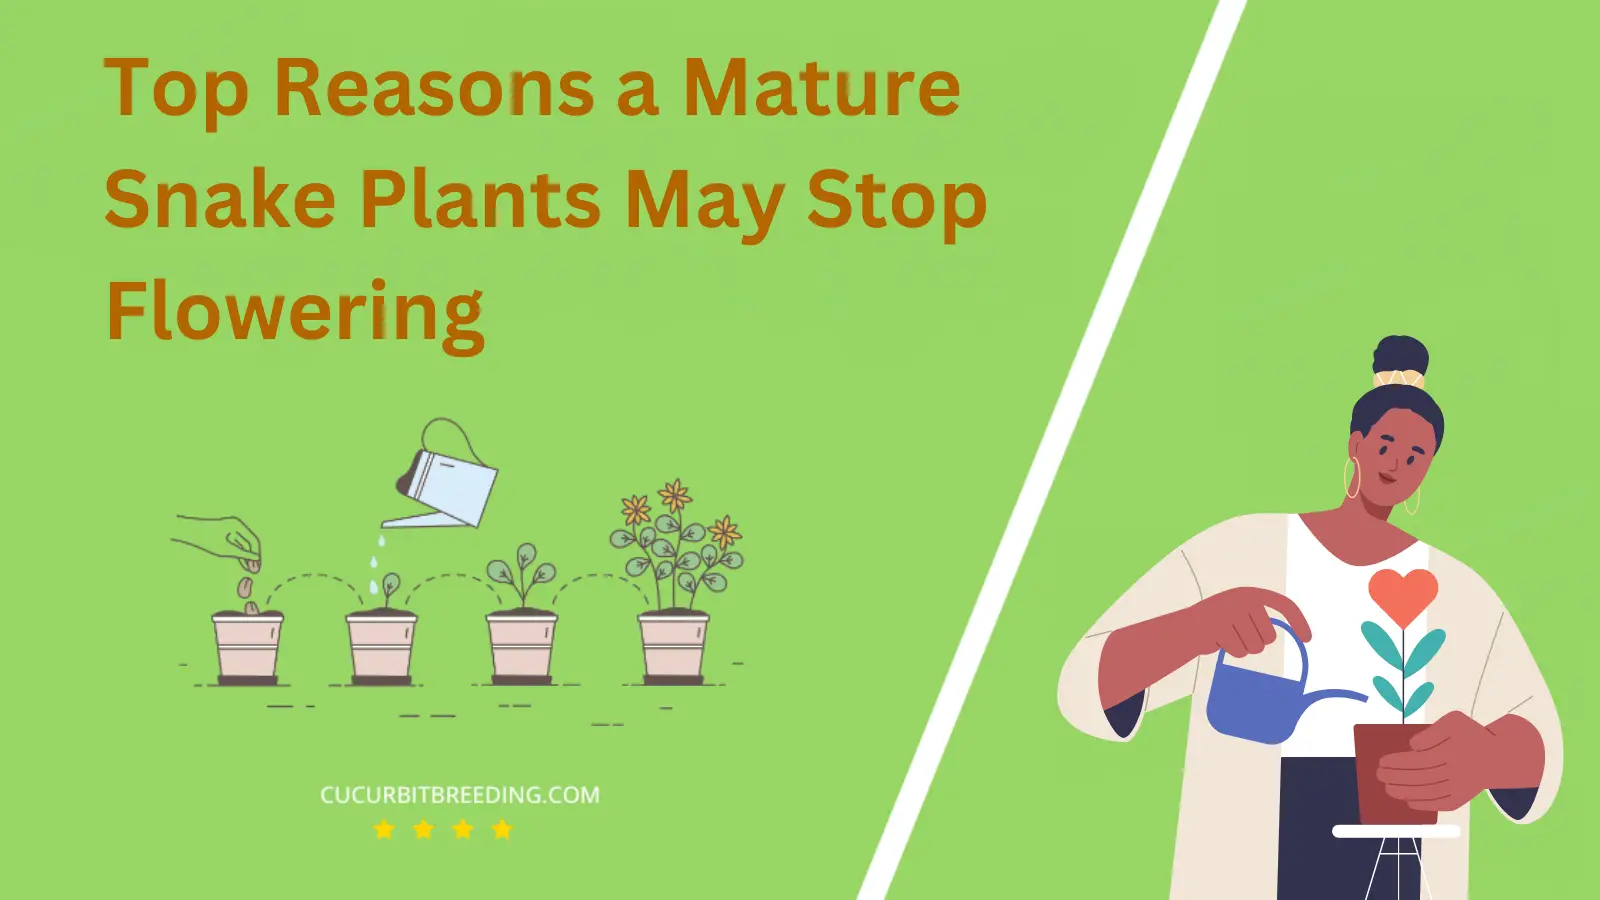 Top Reasons a Mature Snake Plants May Stop Flowering